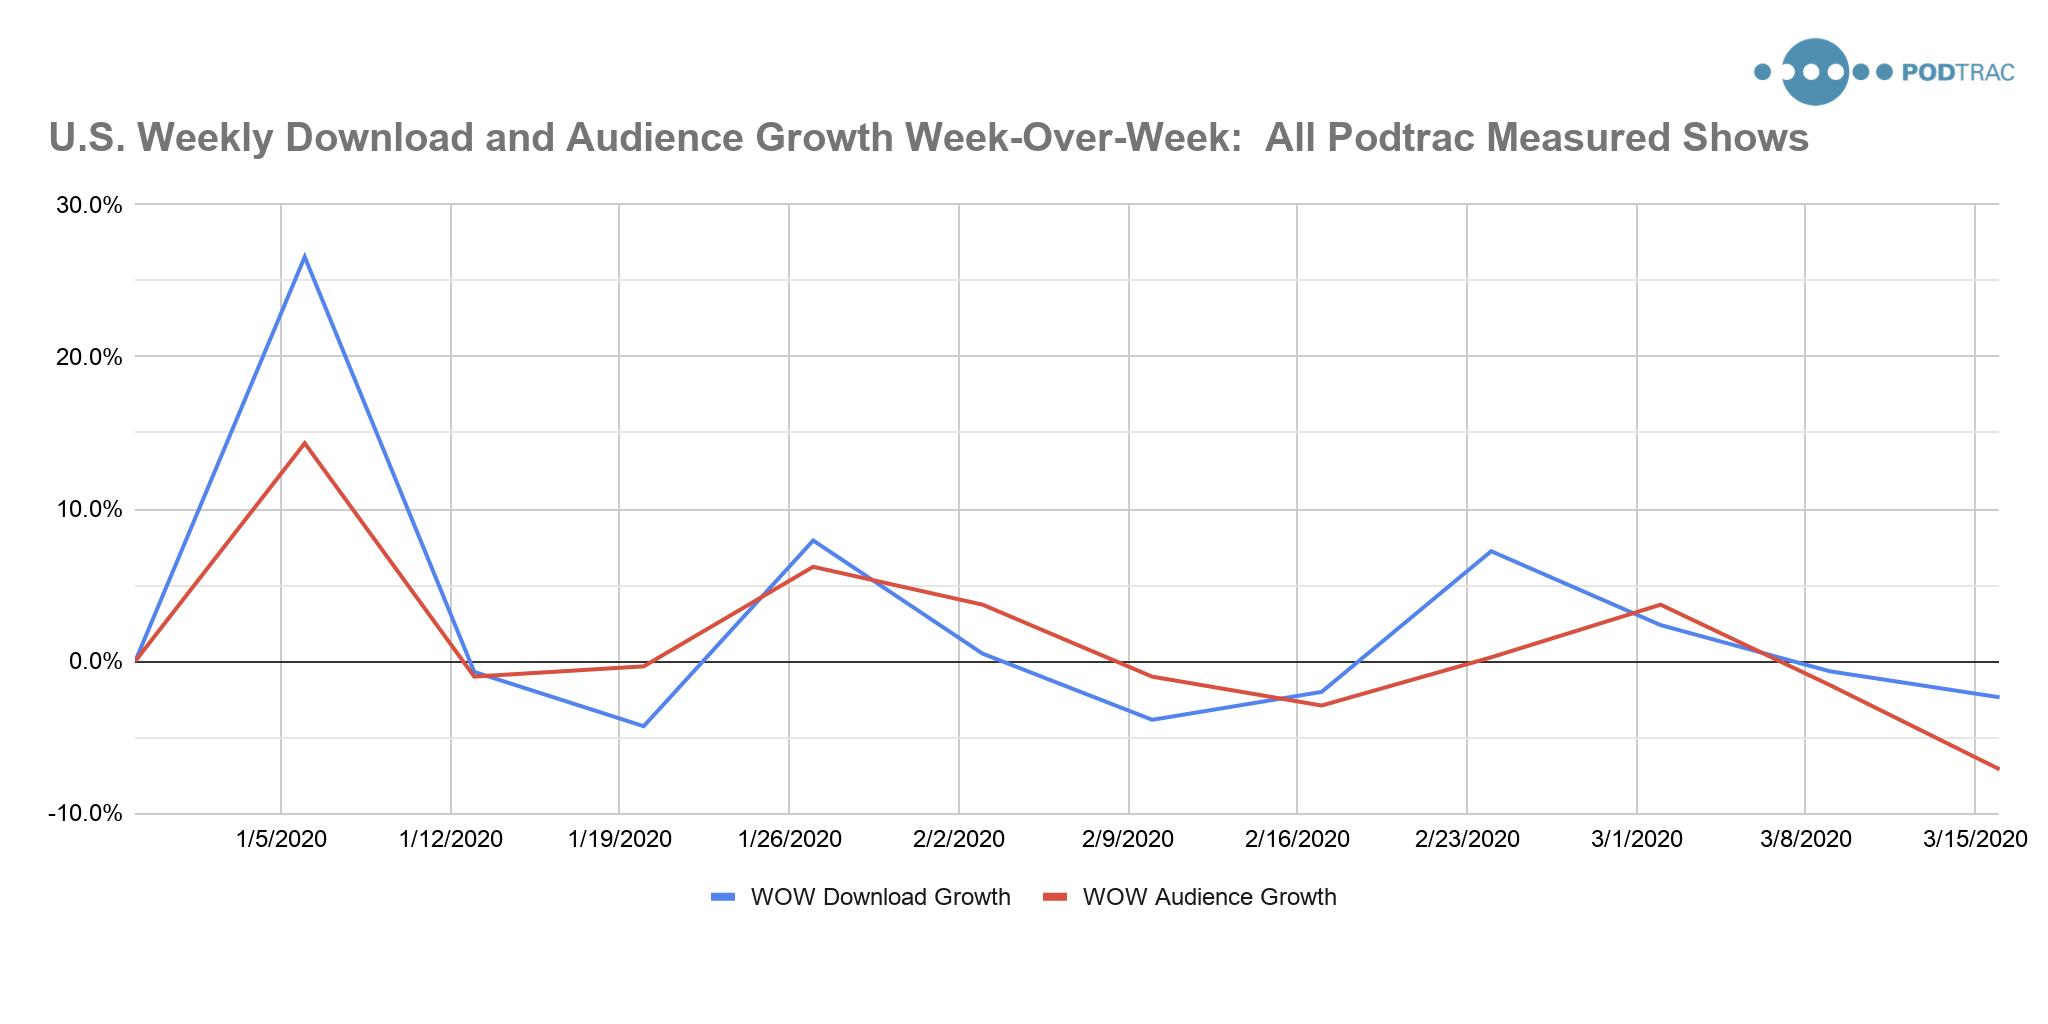 Week-Over-Week U.S. Podcast Download and Audience Growth